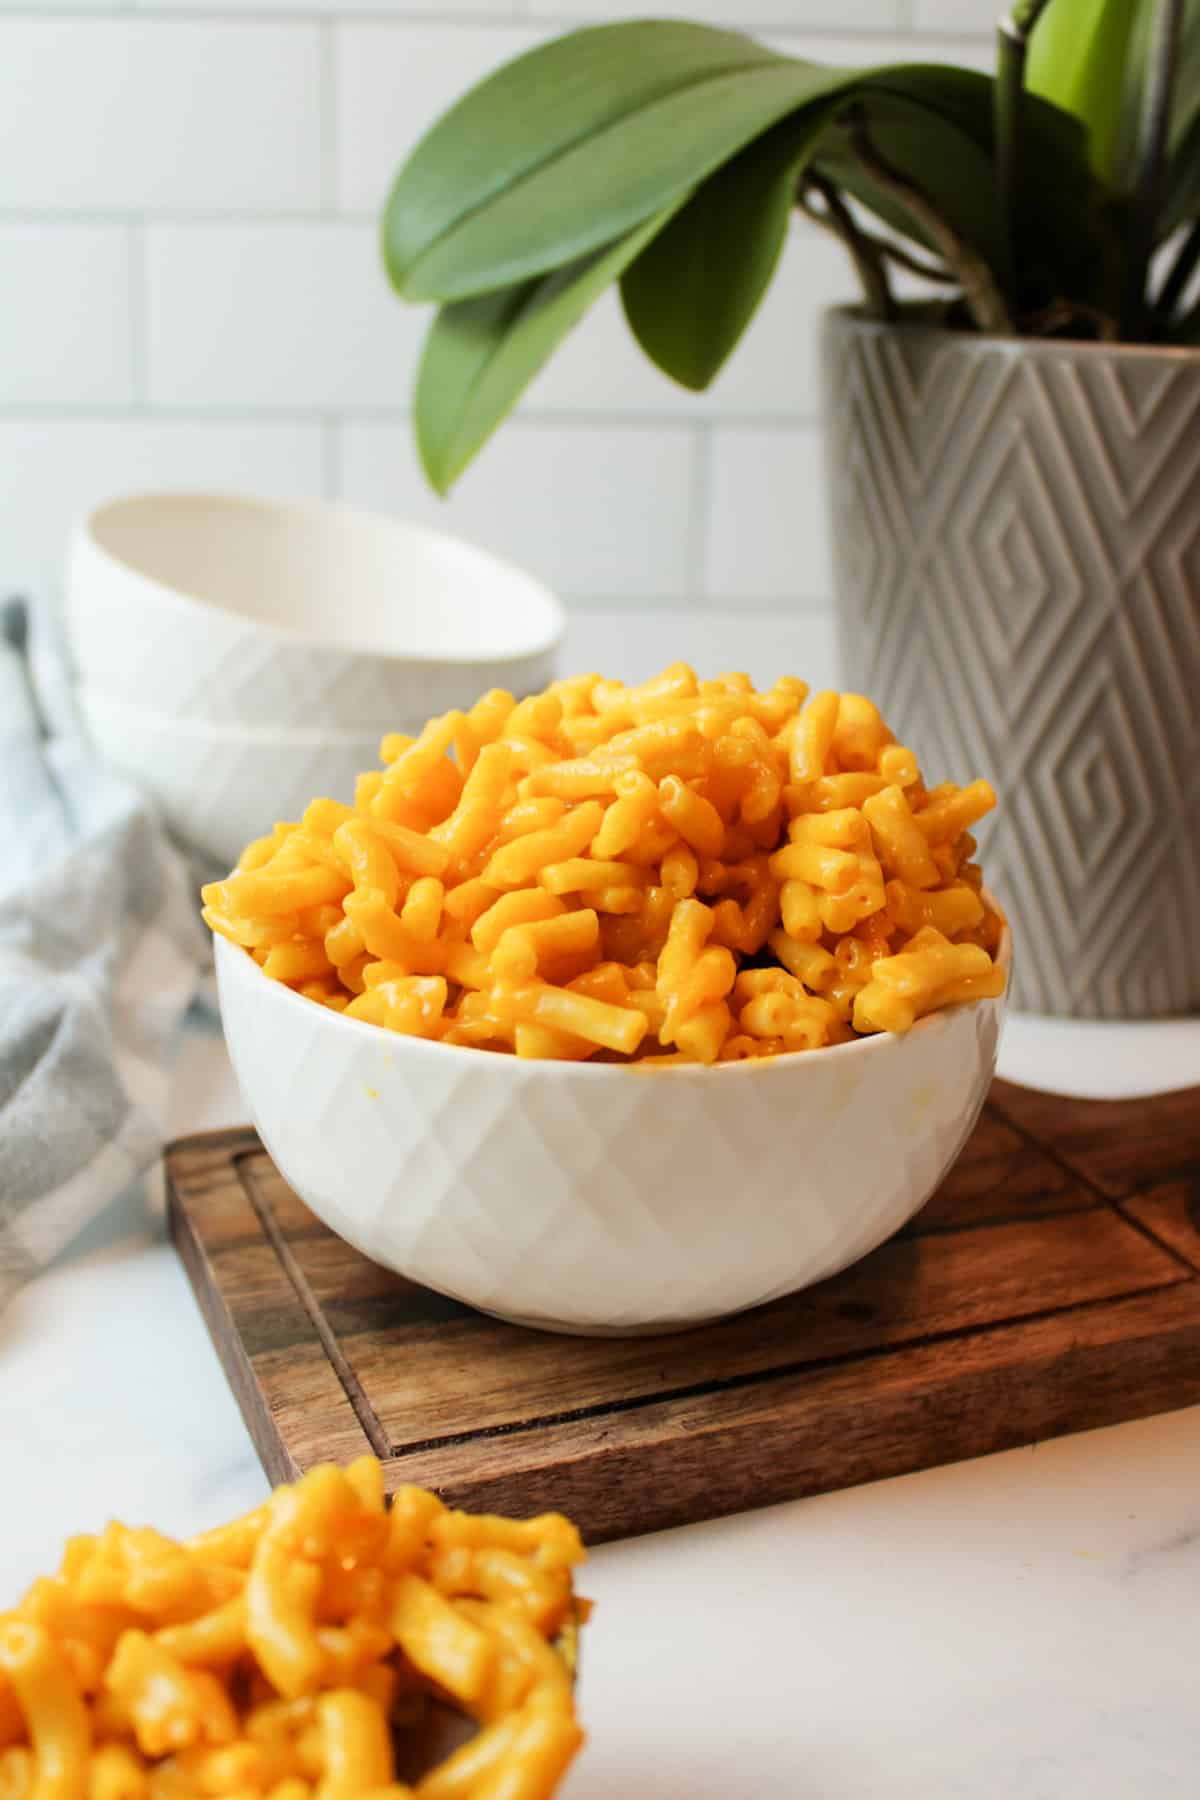 a heaping bowl of mac andcheese in front of a plant and empty bowls.